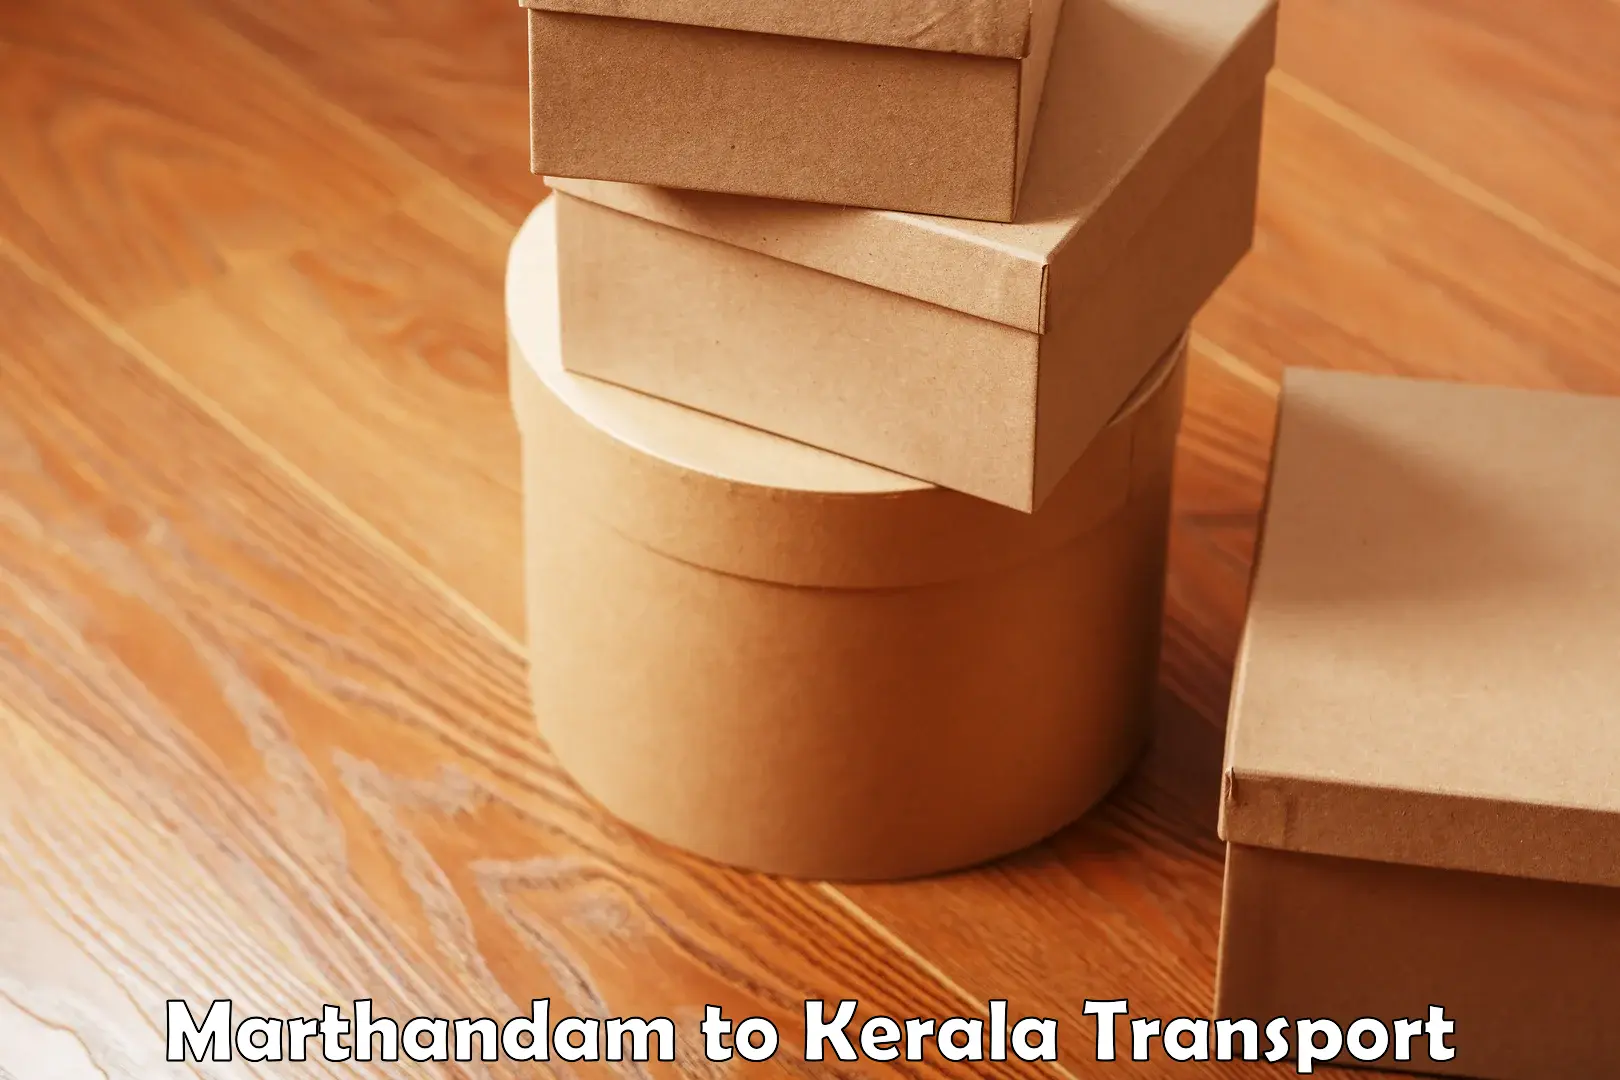 Transport shared services Marthandam to Cochin